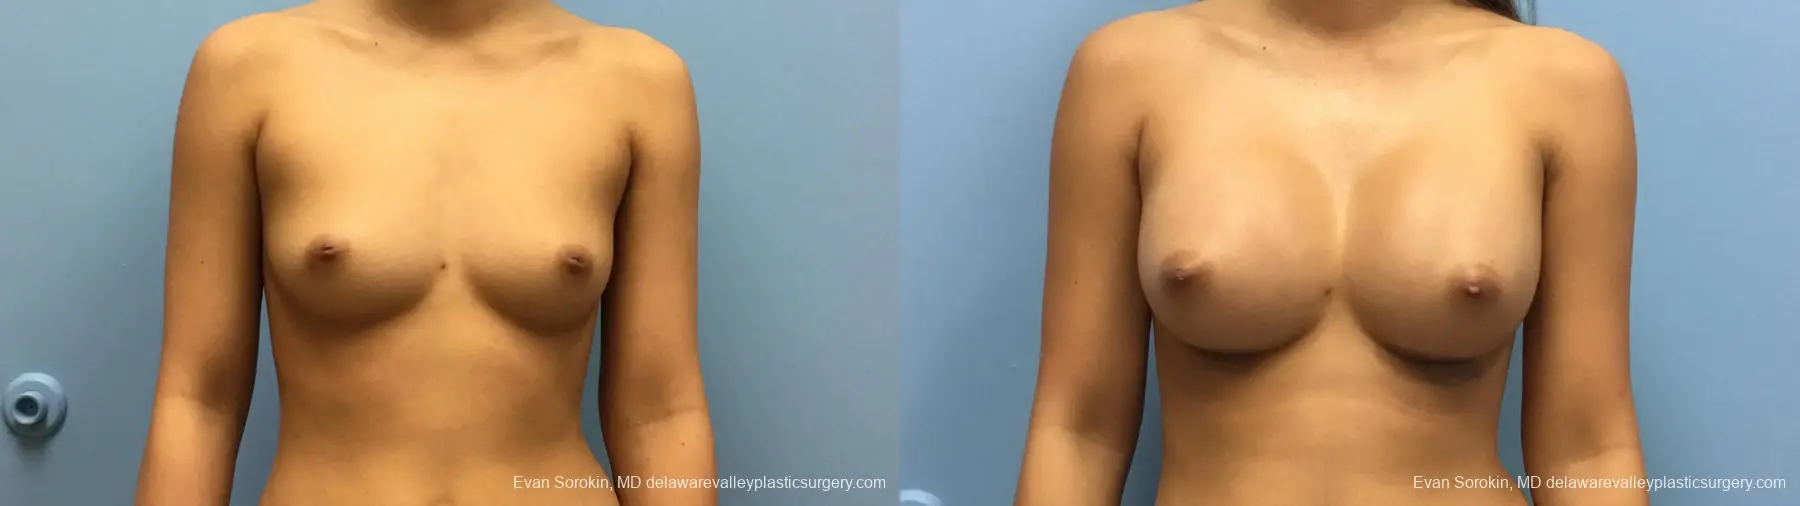 Philadelphia Breast Augmentation 13183 - Before and After 1